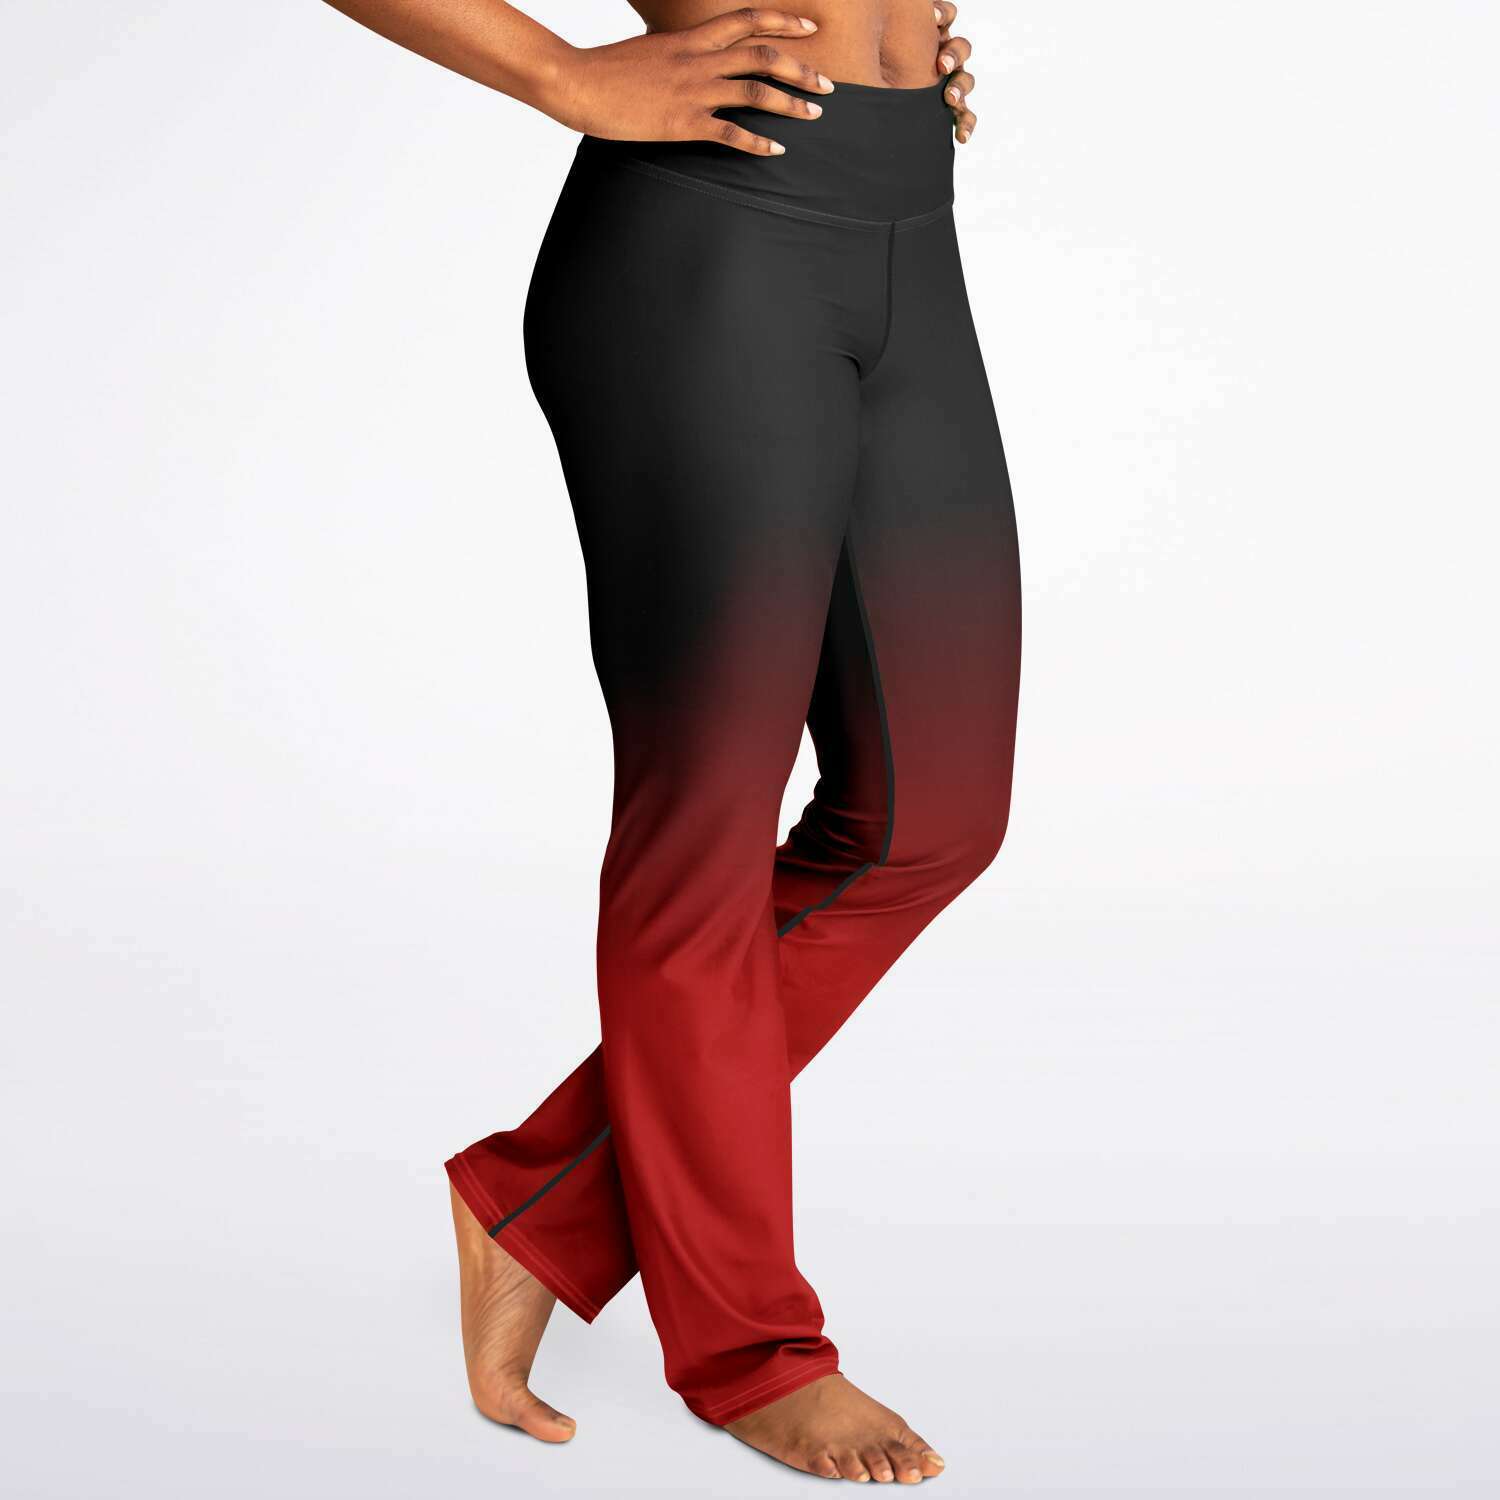 Black Red Ombre Flared Leggings, Tie Dye Printed High Waisted Yoga Des –  Starcove Fashion